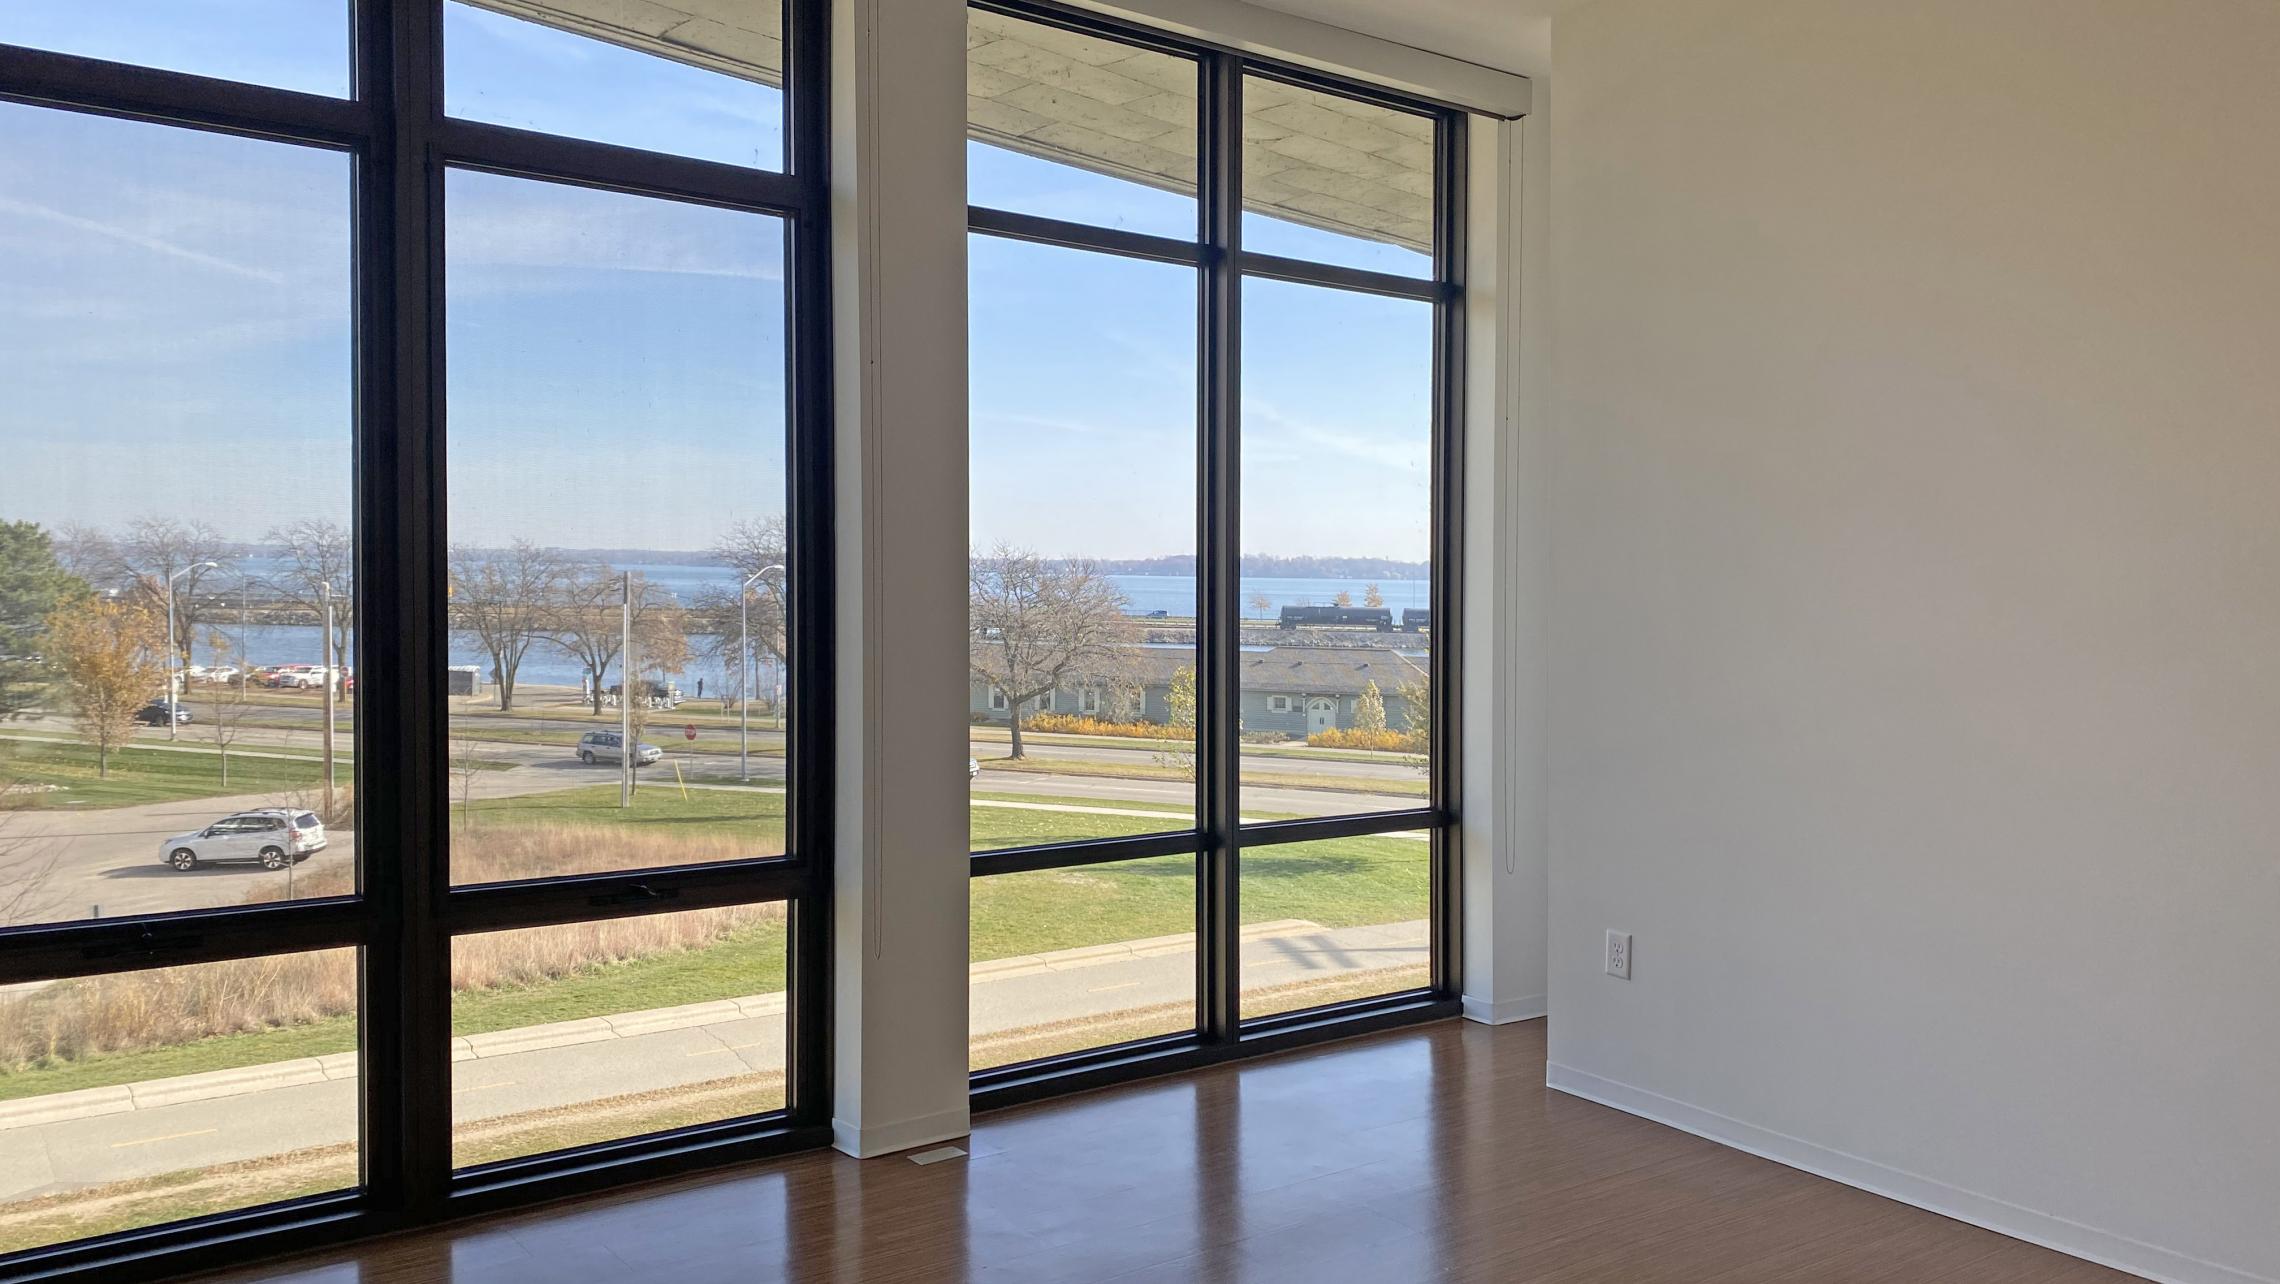 SEVEN27-The-Yards-Apartment-340-Two-Bedroom-Windows-Natural-Light-Stunning-Lake-View-Cats-Dogs-Balcony-Lounge-Modern-Upscale-Luxury-Kitchen-Bathroom-Design-Downtown-Madison